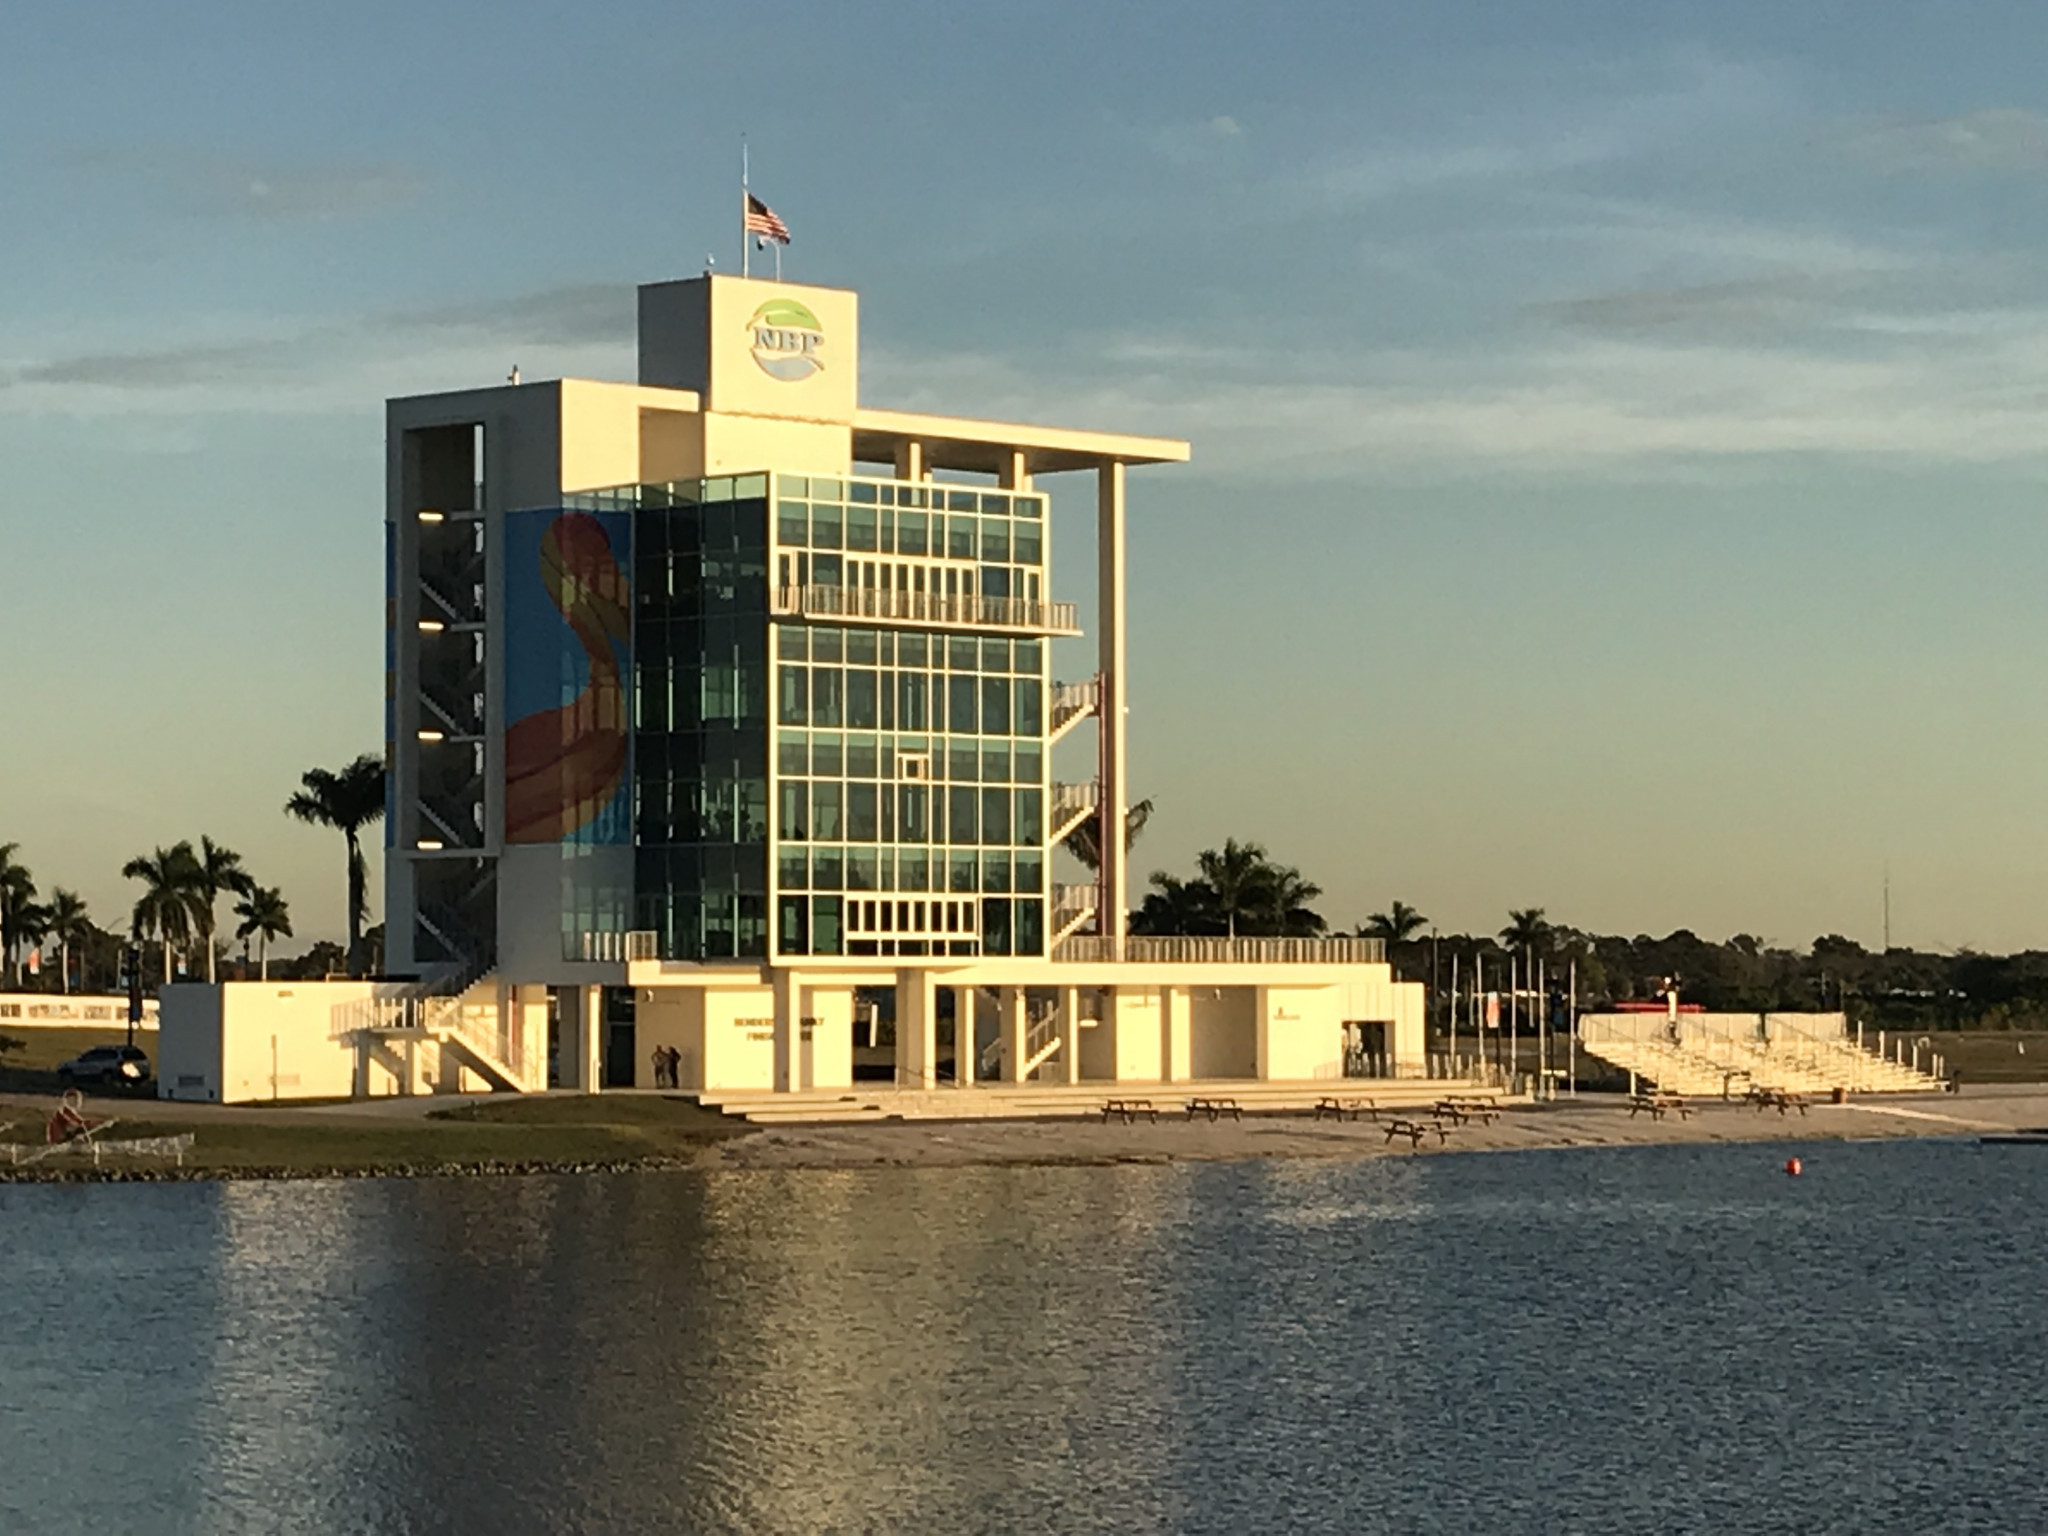 Nathan Benderson Park in Florida has been selected as the host venue for the first two United States Olympic and Paralympic rowing team trials ©Wikipedia